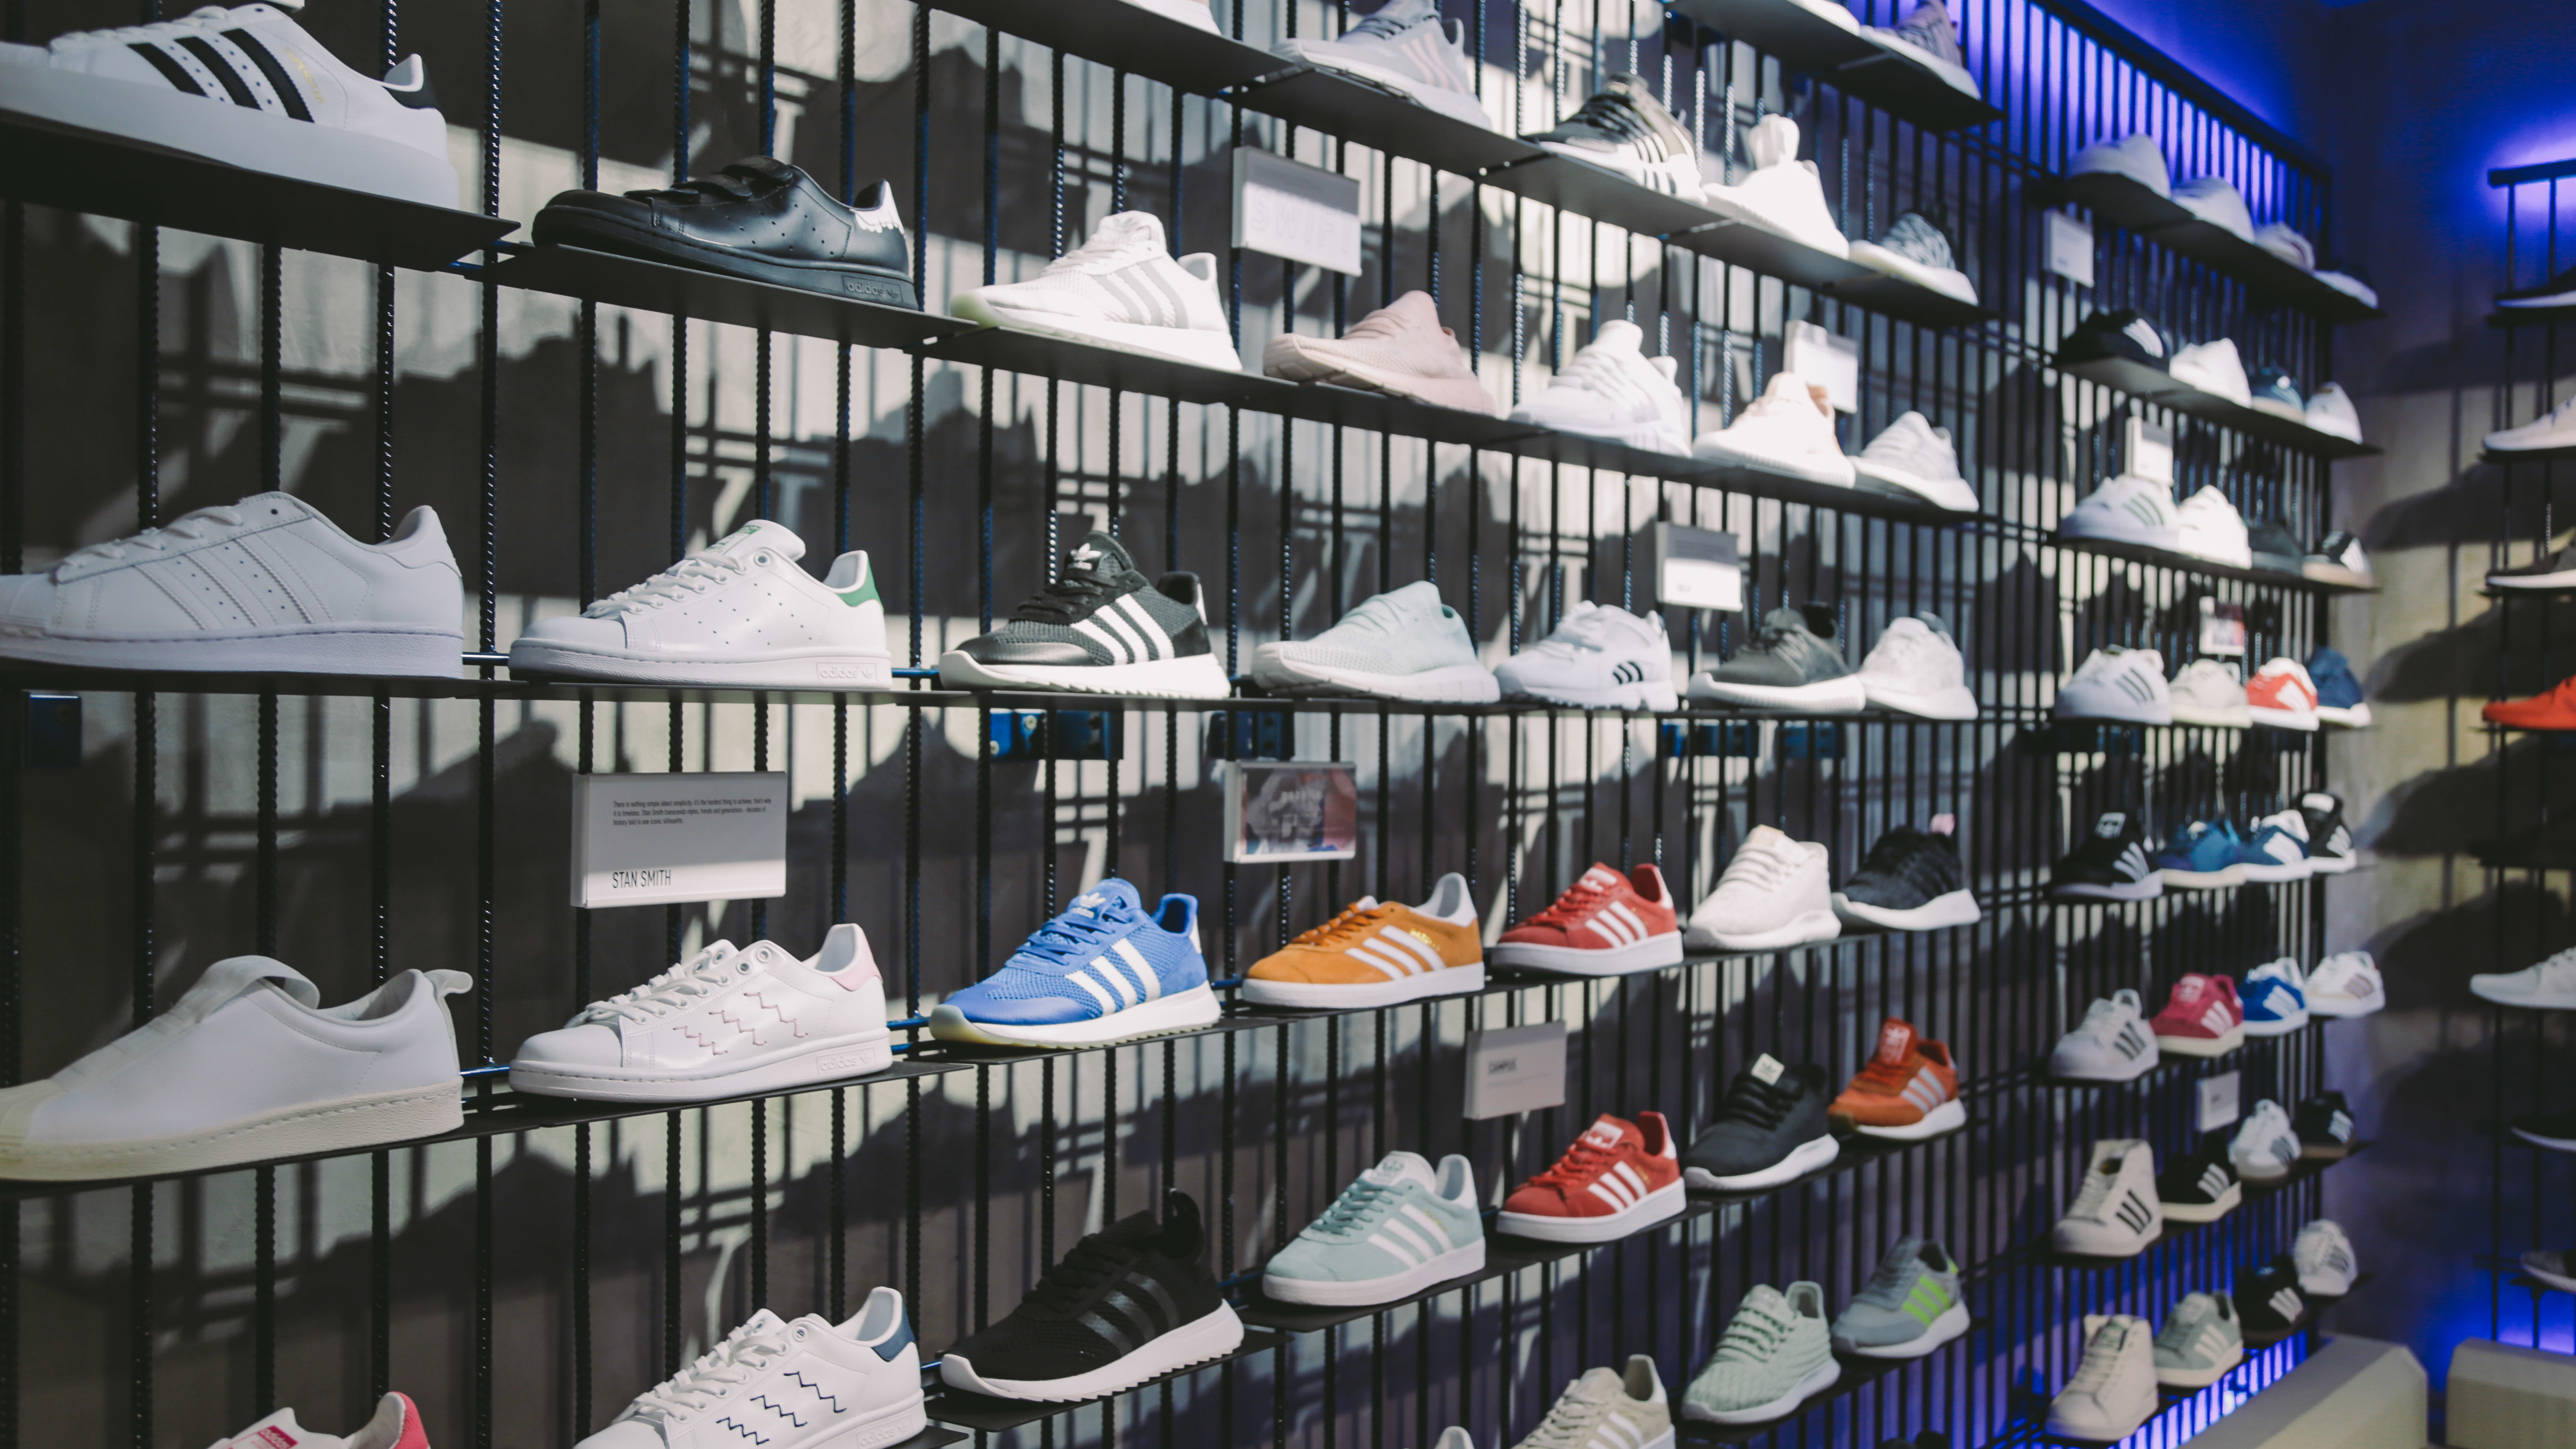 Adidas Is Closing Stores in North America and Europe Coronavirus | Sole Collector